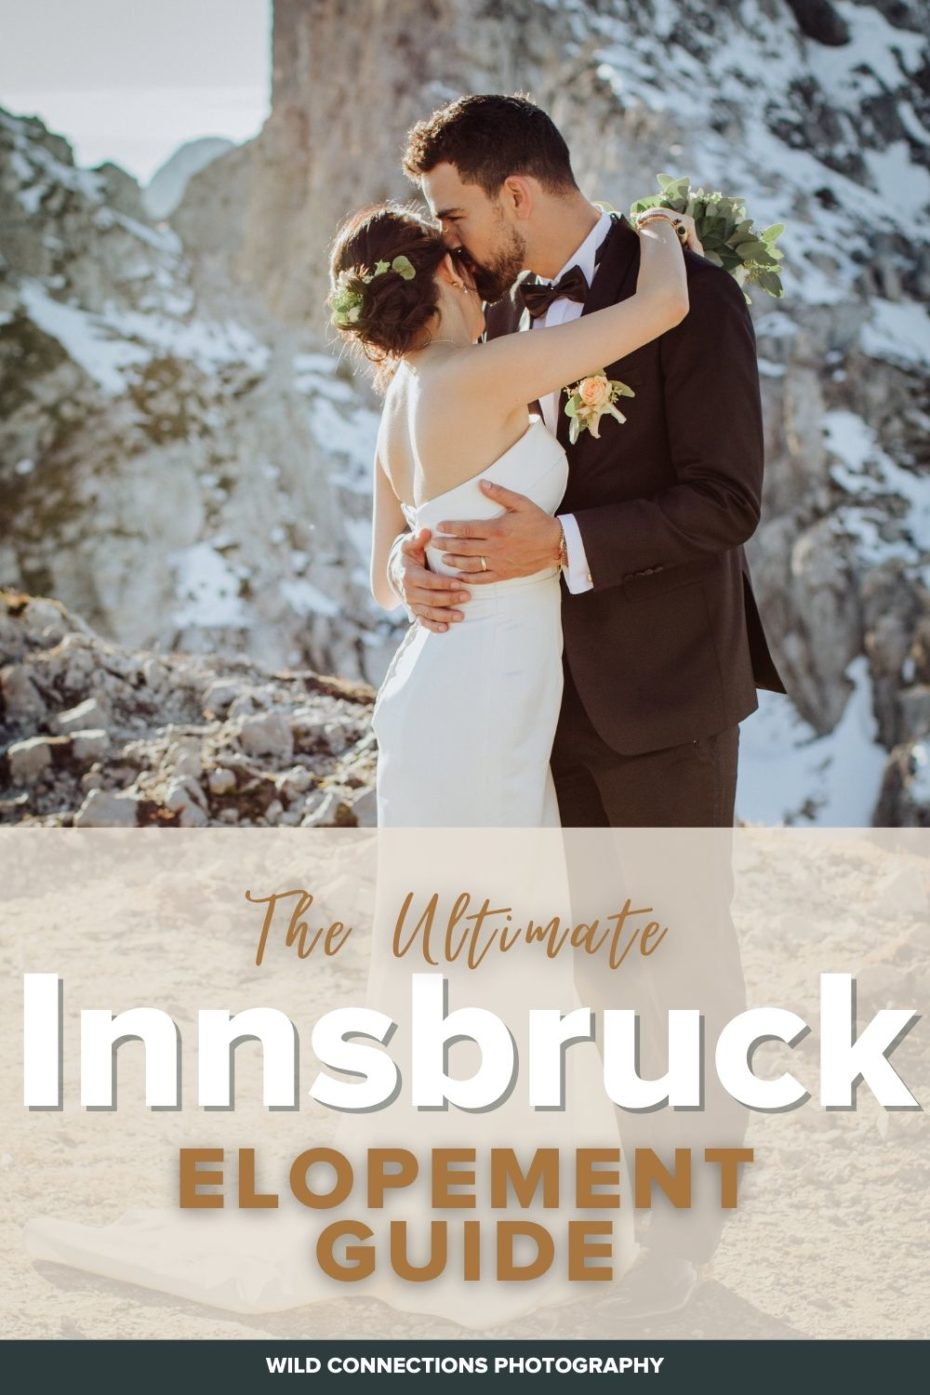 Want to get married in Innsbruck in the Alps? This guide will tell you all you need to know.